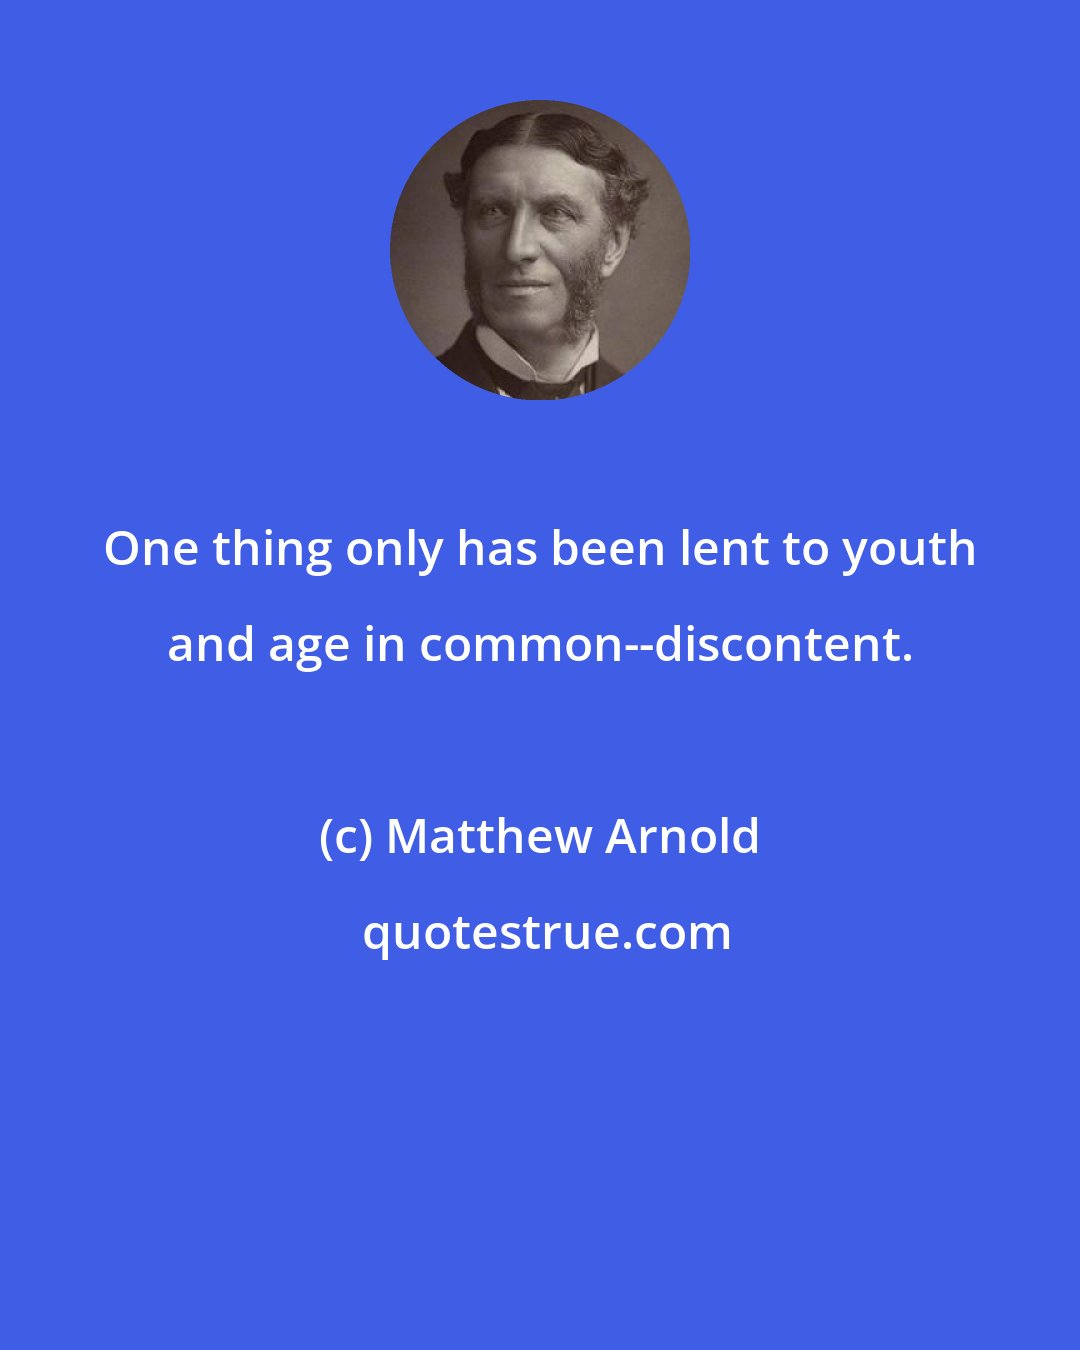 Matthew Arnold: One thing only has been lent to youth and age in common--discontent.